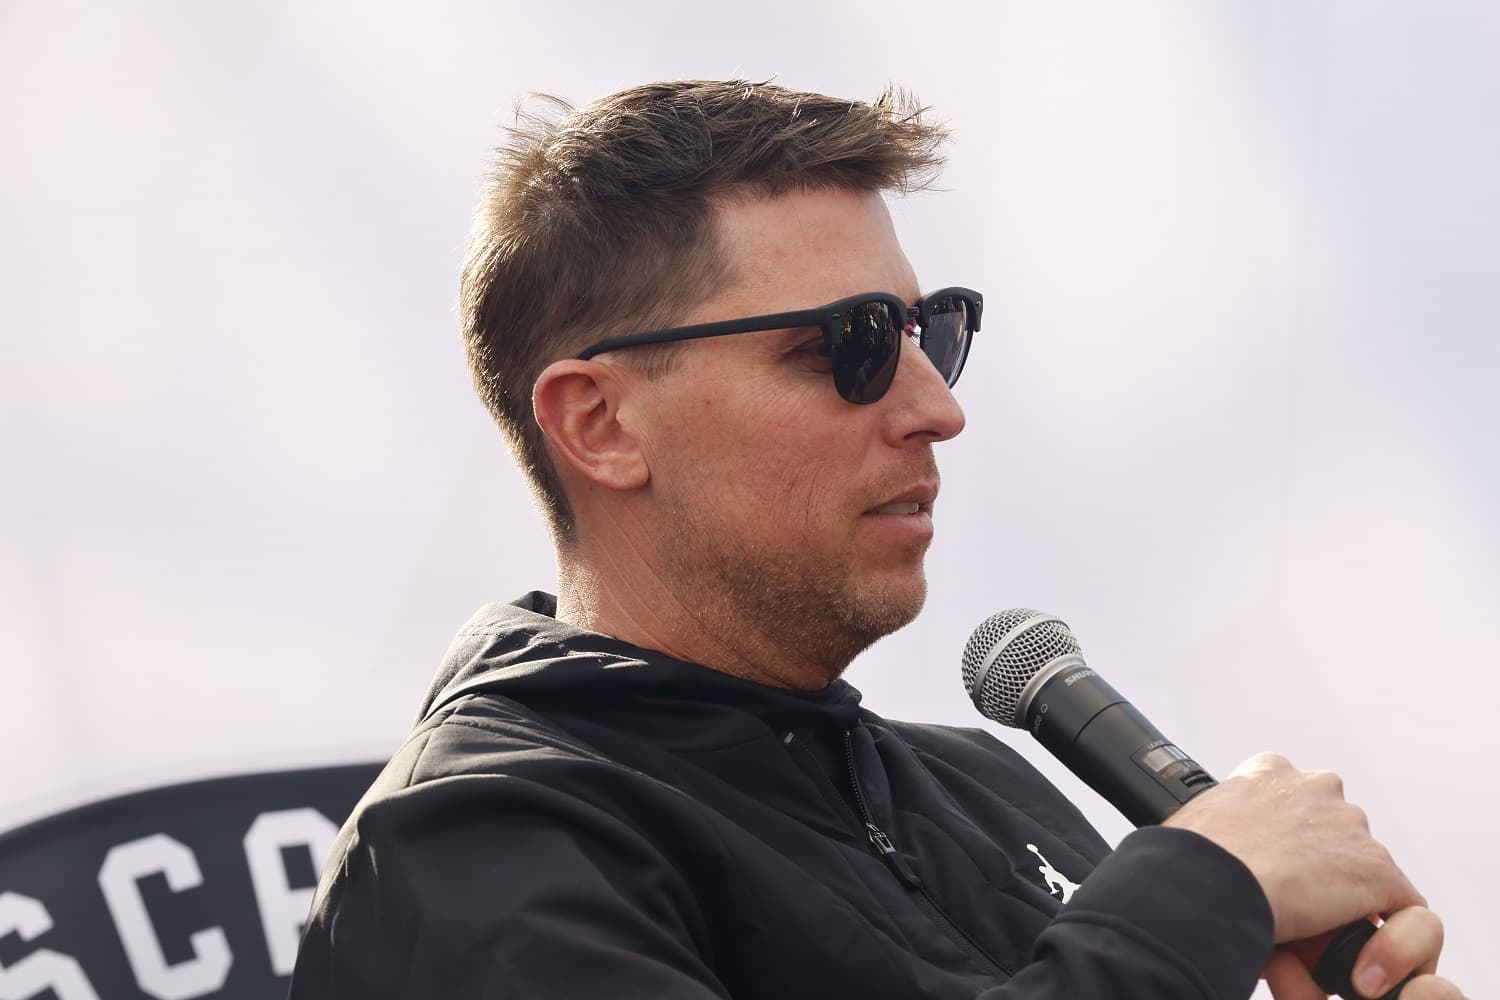 Denny Hamlin at fanfest before the start of the NASCAR Cup Series Busch Light Clash at The Coliseum on Feb. 5, 2023. | Jeff Speer/Icon Sportswire via Getty Images